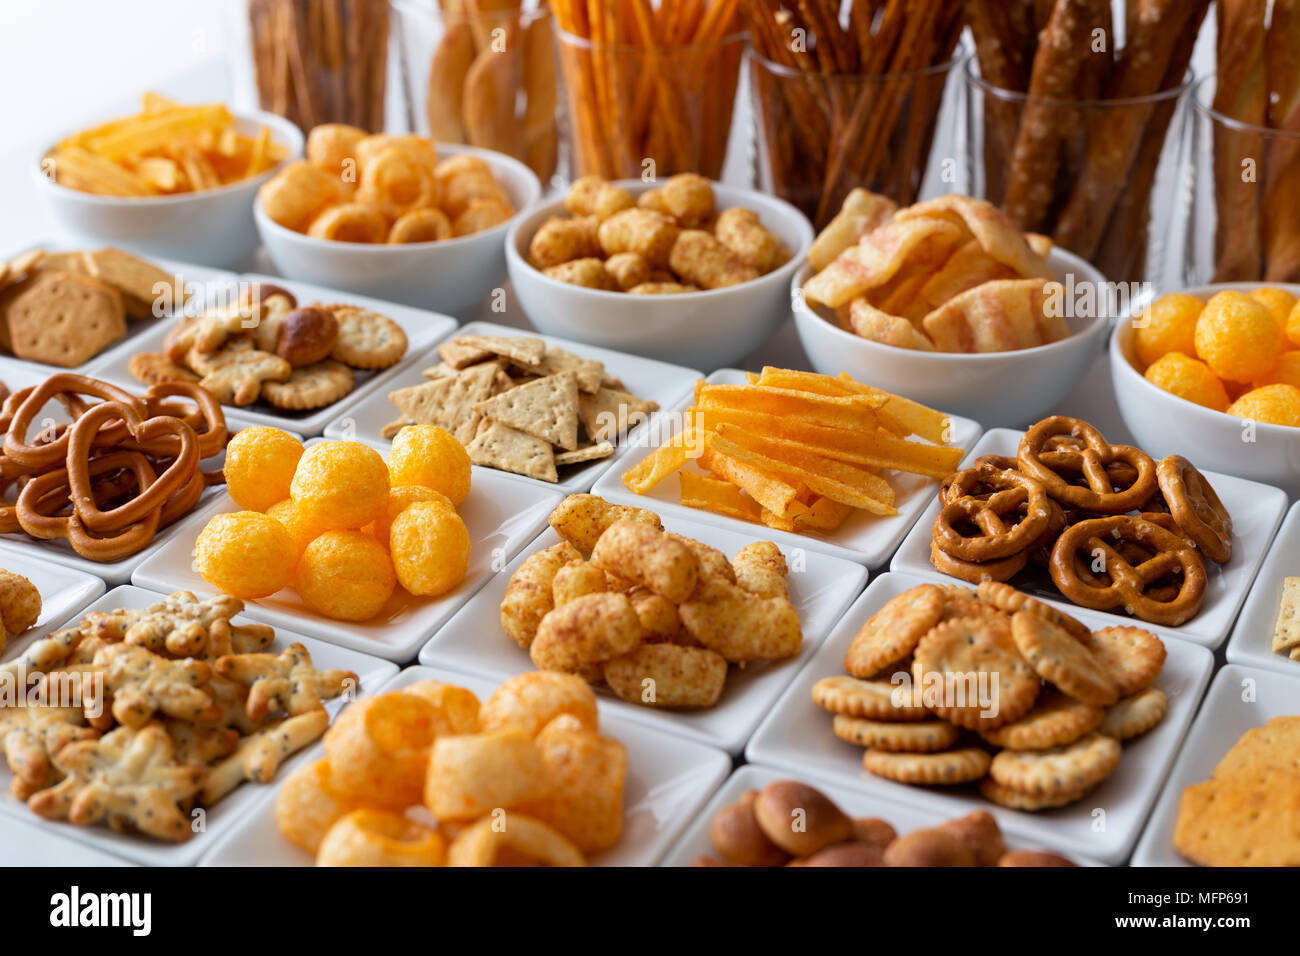 Rows of many types of savory snacks in white ceramic dishes. Stock Photo